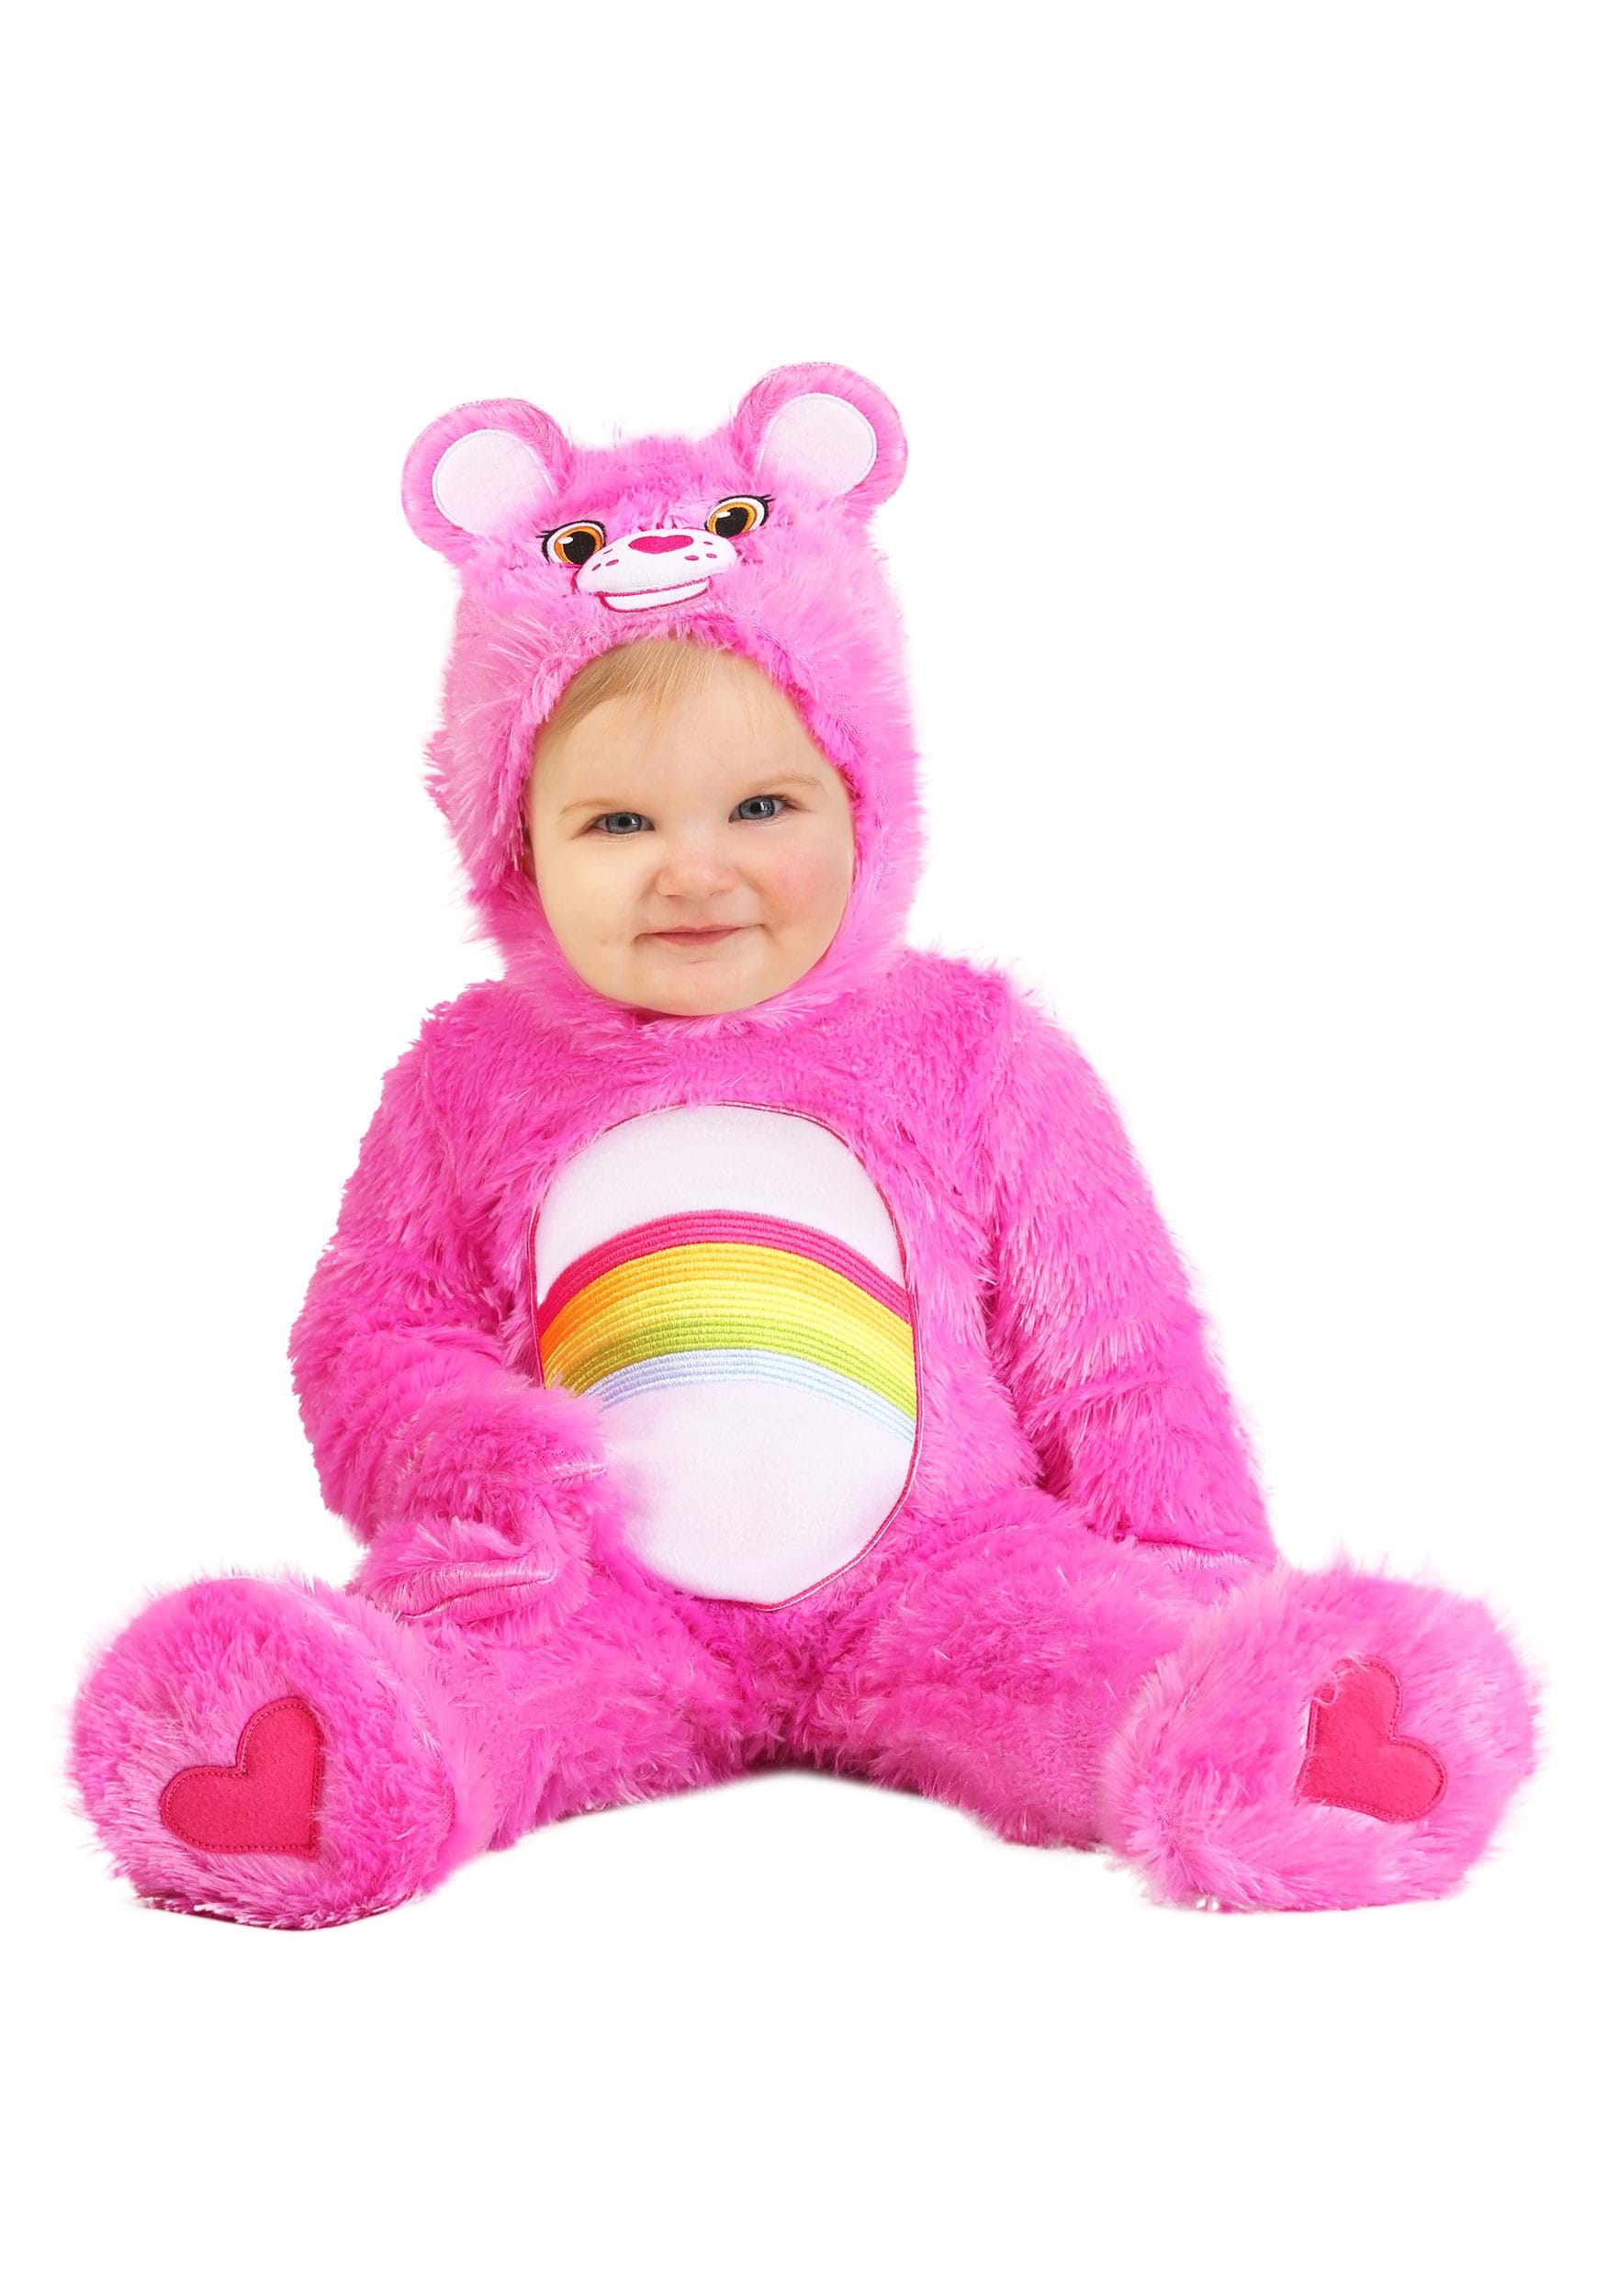 Photos - Fancy Dress CARE FUN Costumes Infant  Bears Cheer Bear Costume Pink/Yellow/Whit 